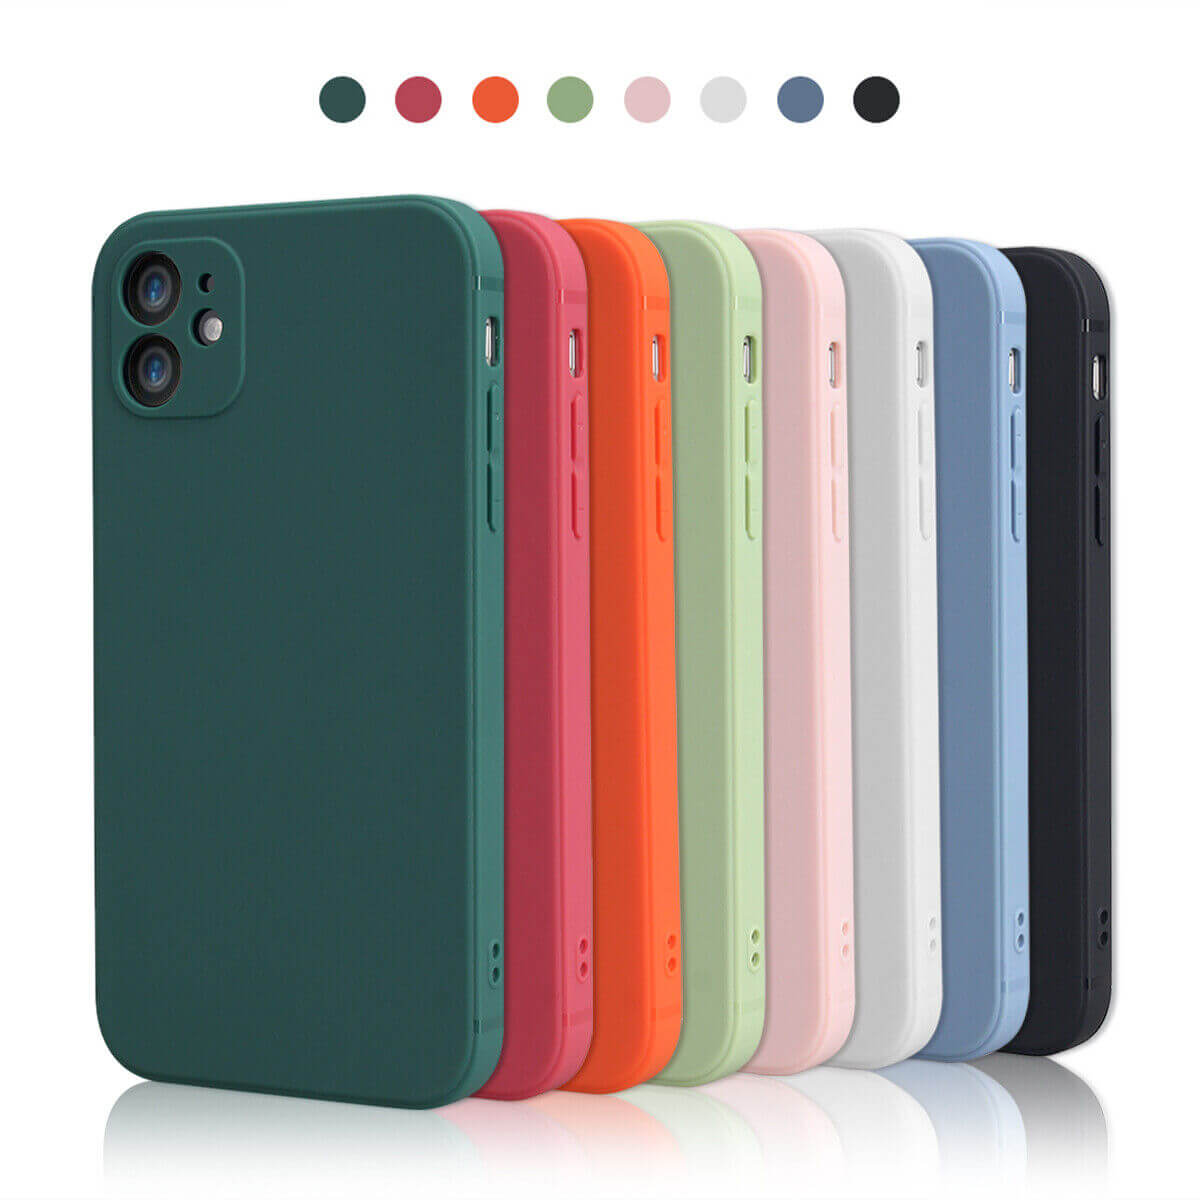 Silicone Case - Smooth, Scratch-Resistant, All-Weather Grip